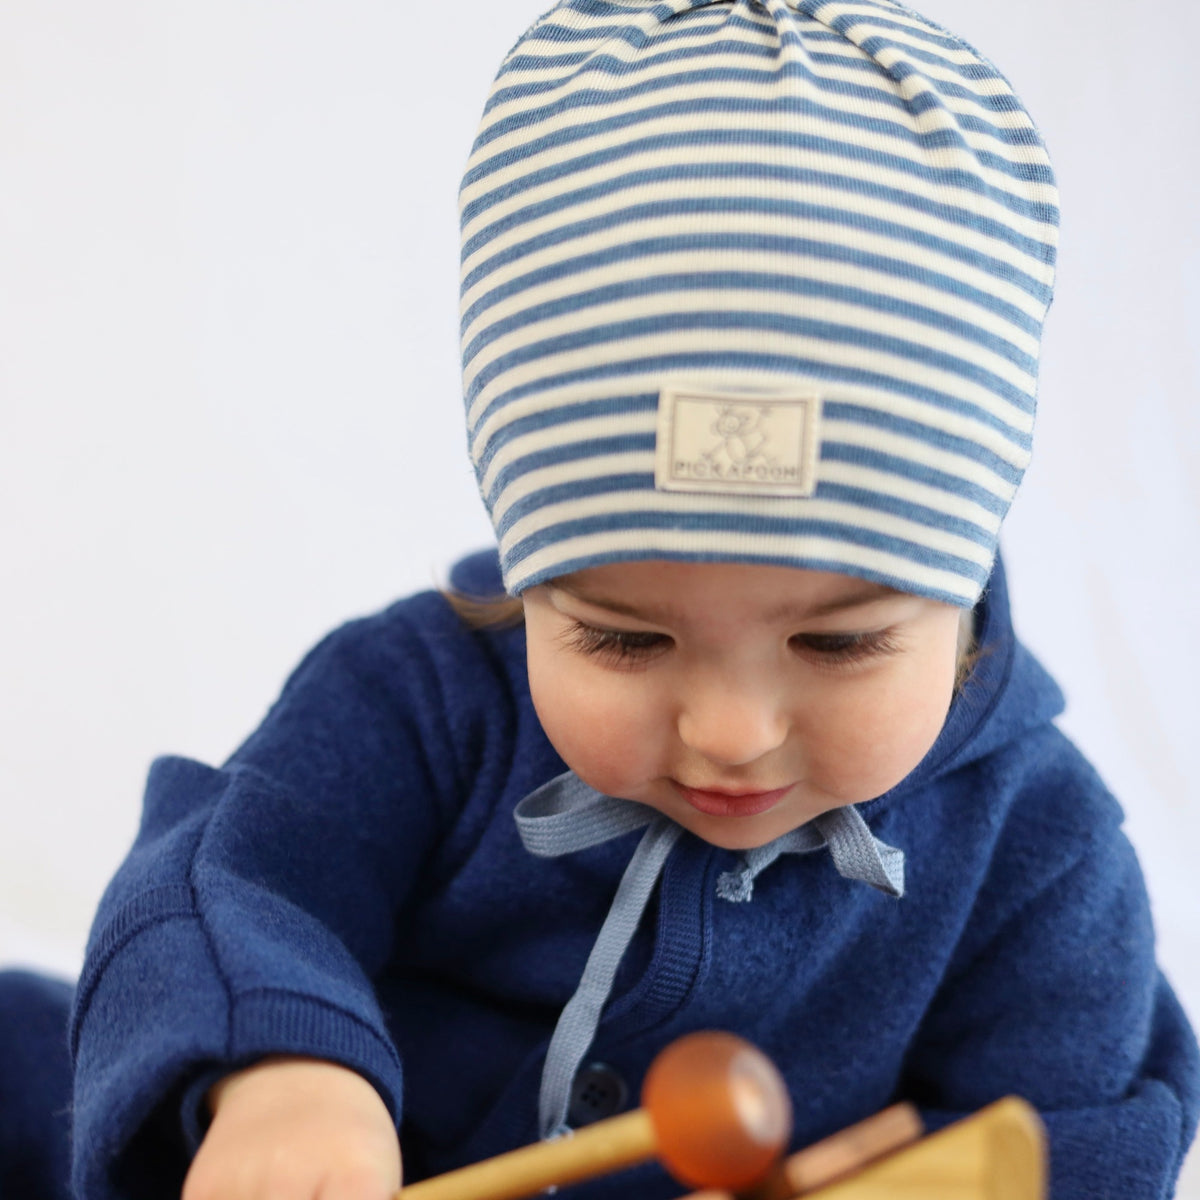 PICKAPOOH - ethical kids accessories in Canada and USA